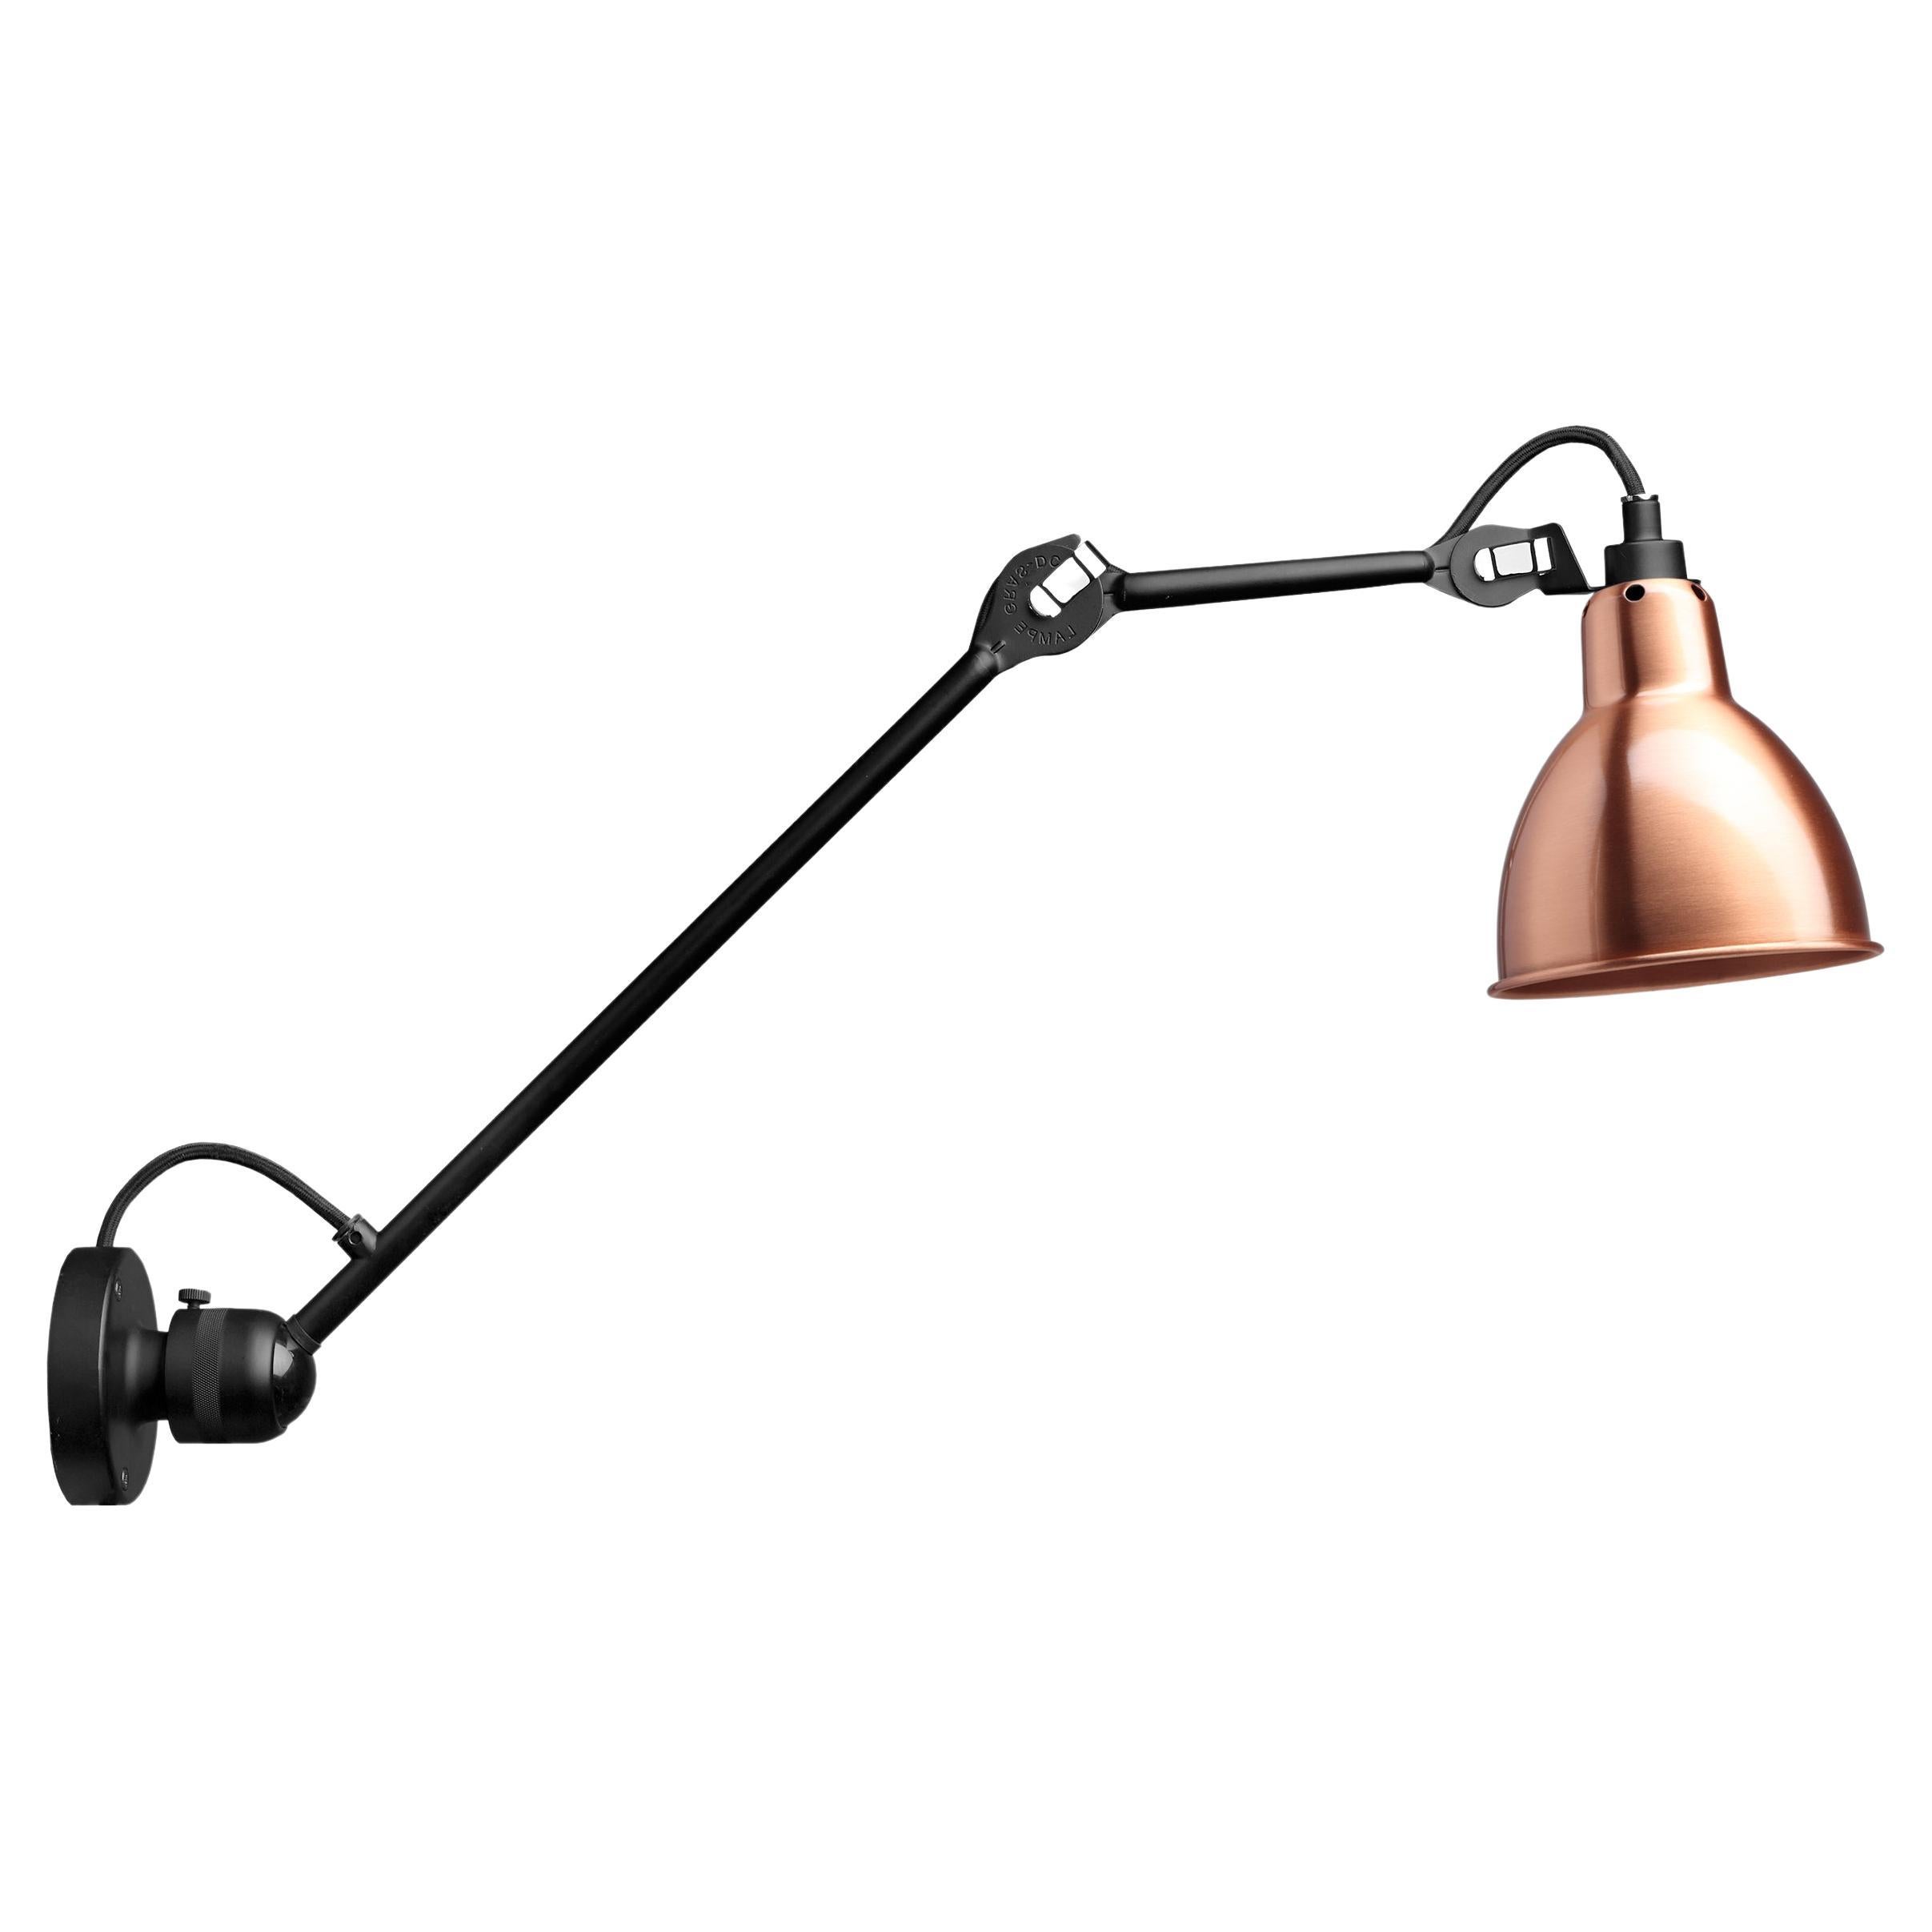 DCW Editions La Lampe Gras N°304 L40 Wall Lamp in Black Arm and Copper Shade For Sale